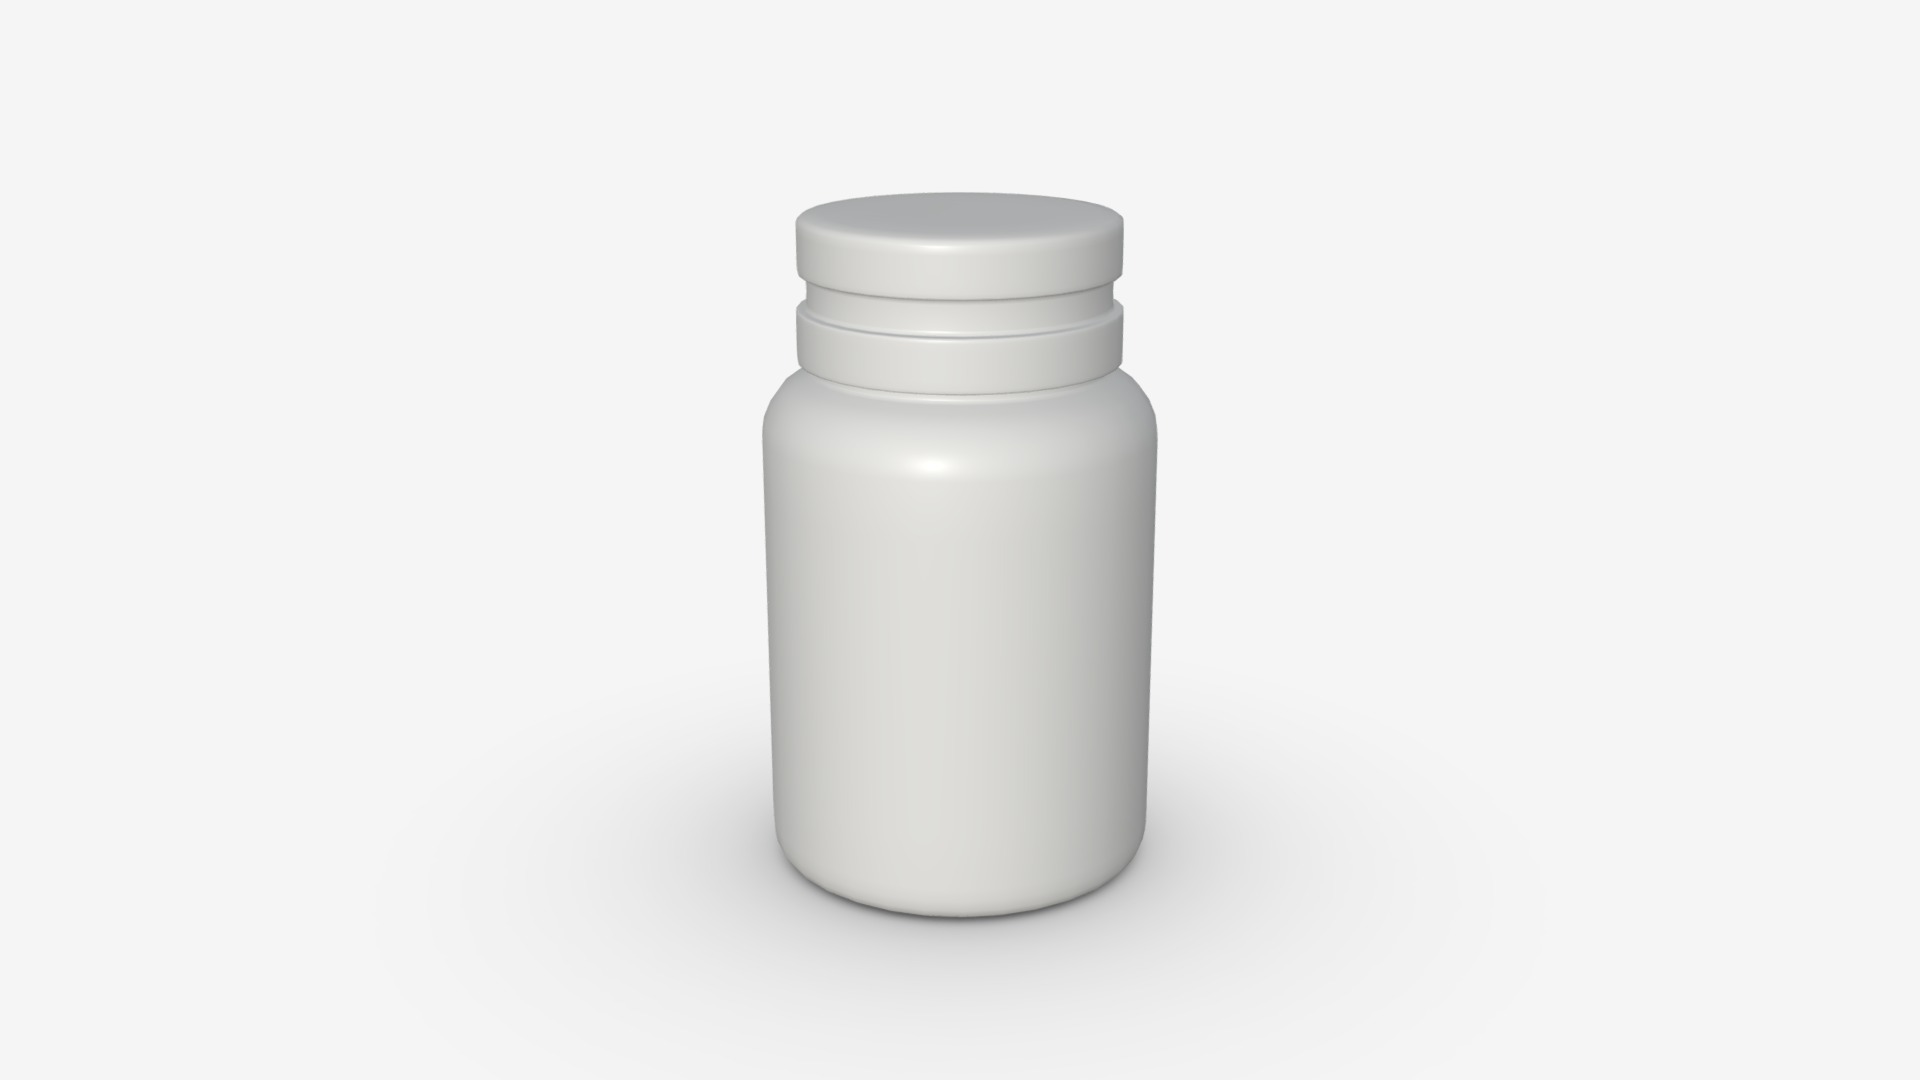 3D model plastic bottle - This is a 3D model of the plastic bottle. The 3D model is about a white cylindrical container.